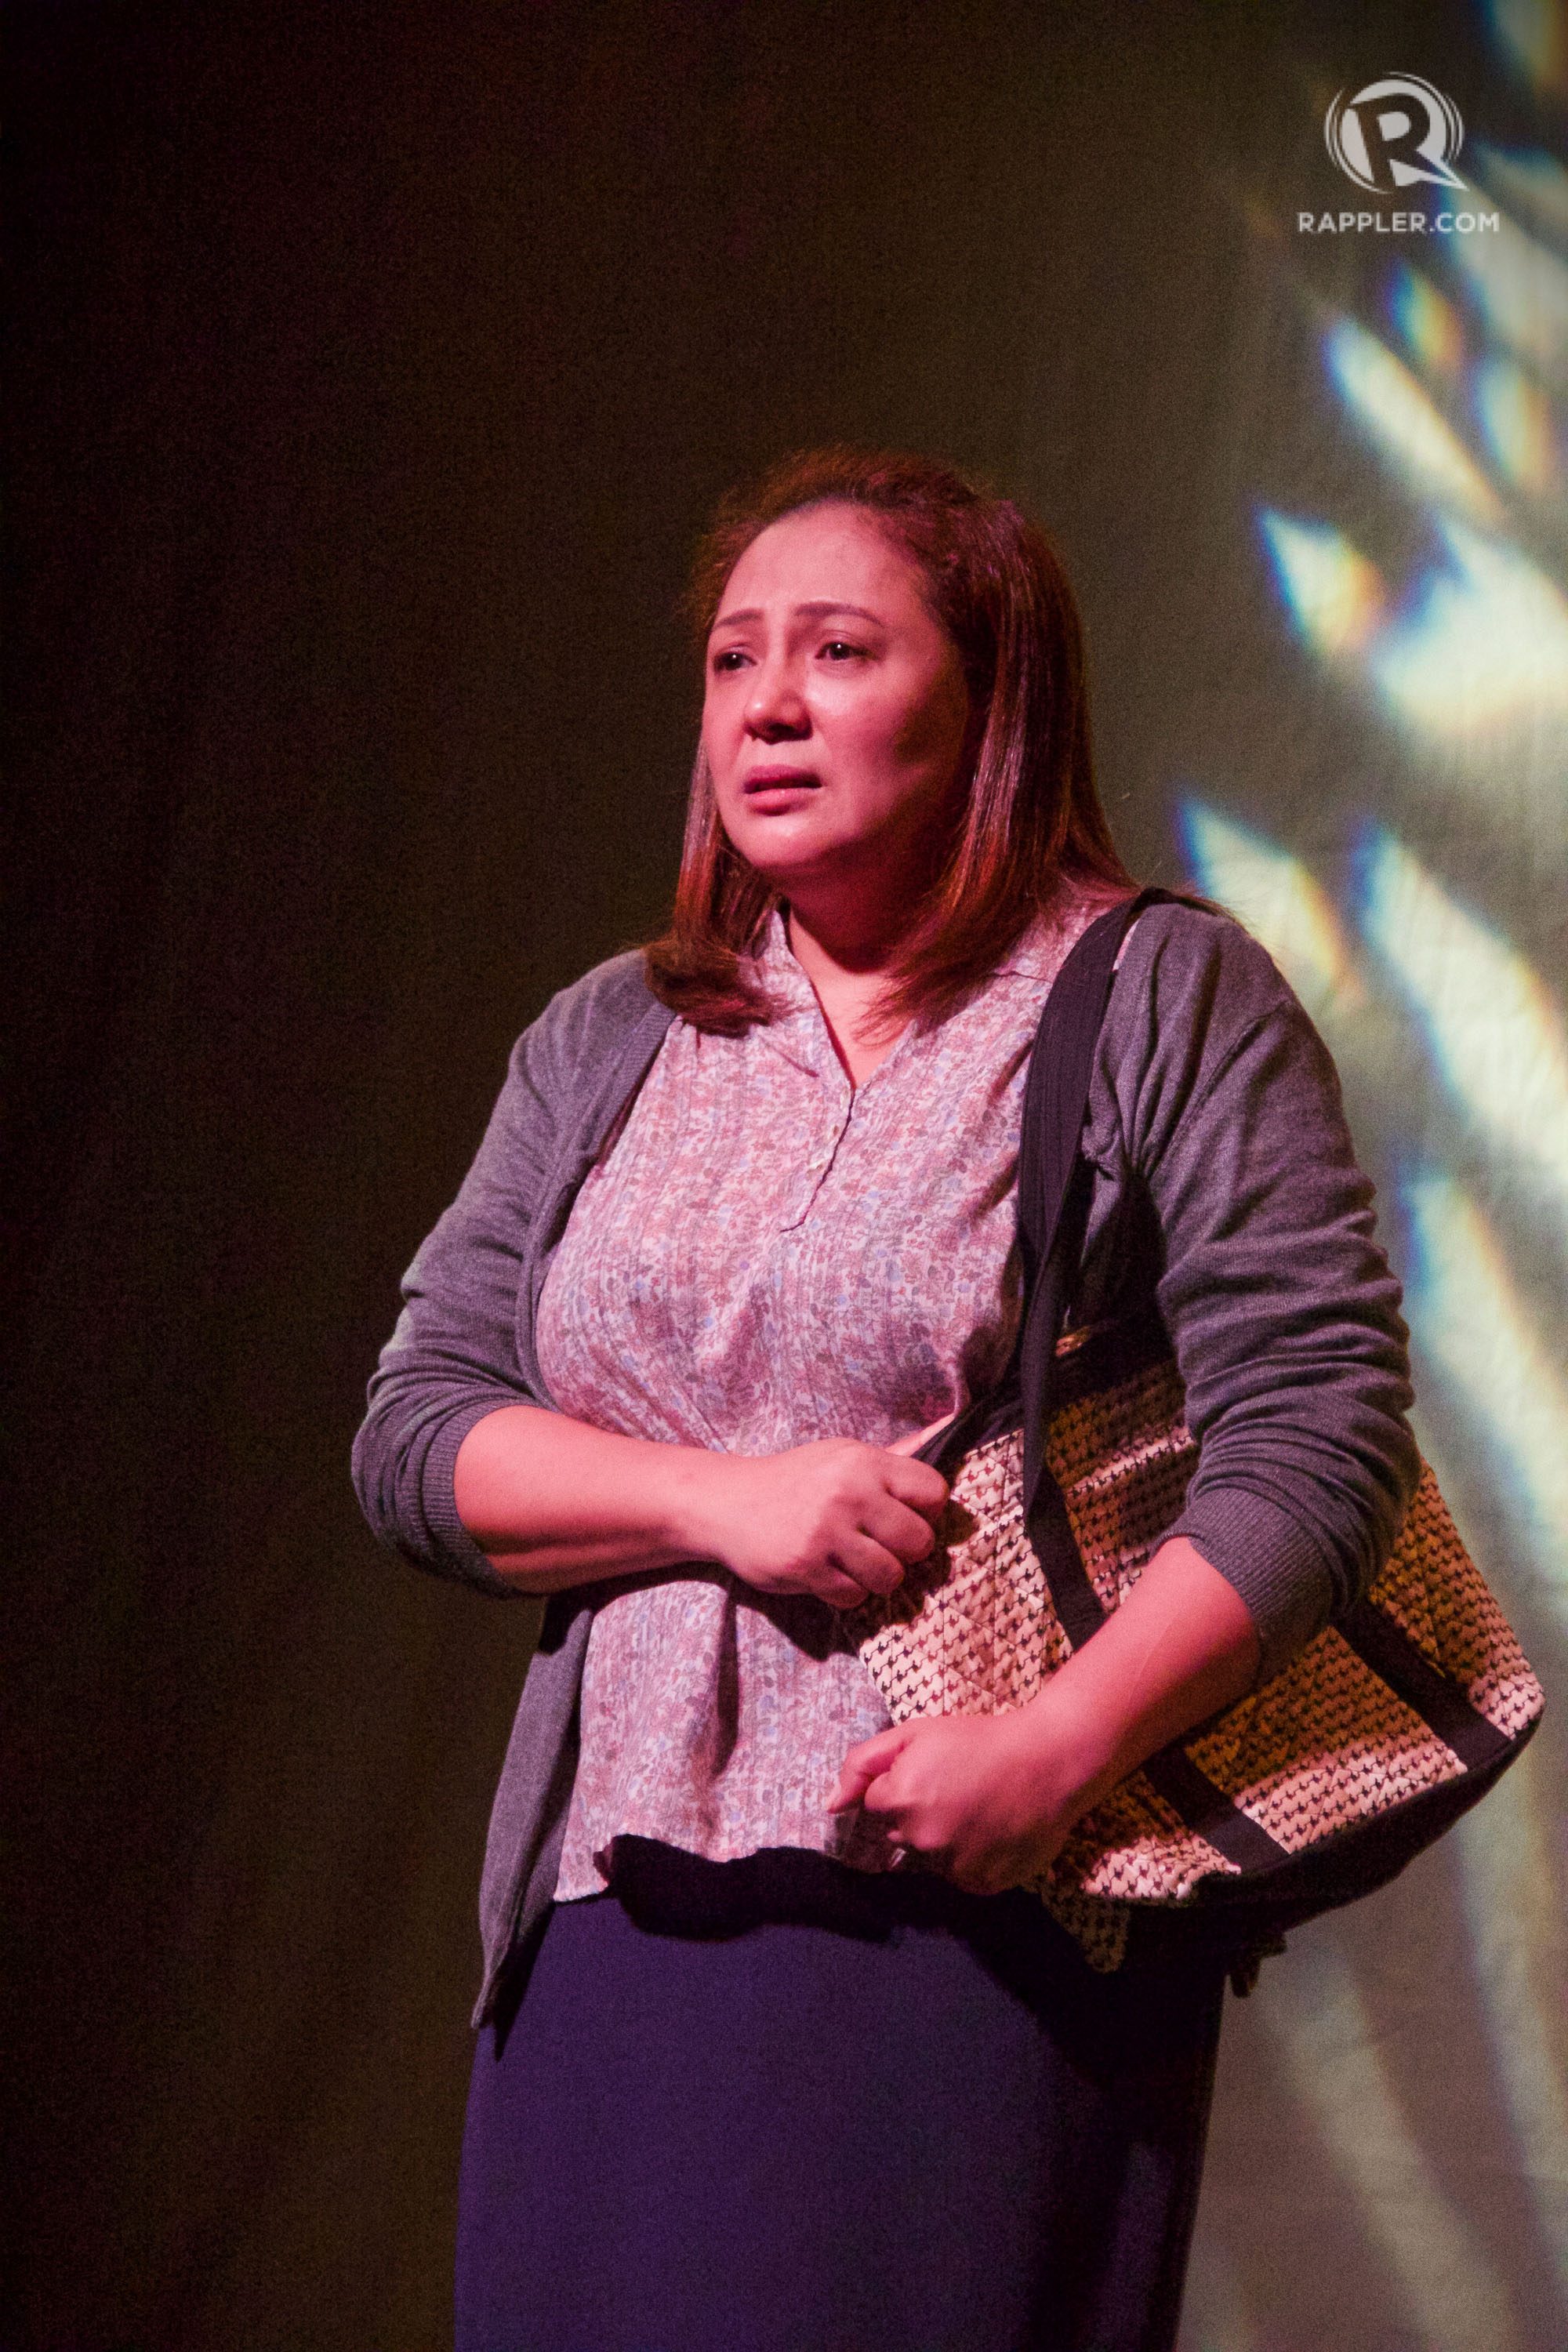 Cherry Pie Picache as a wife who claims her husband activist's body at the morgue. Photo by Rome Jorge/Rappler
 